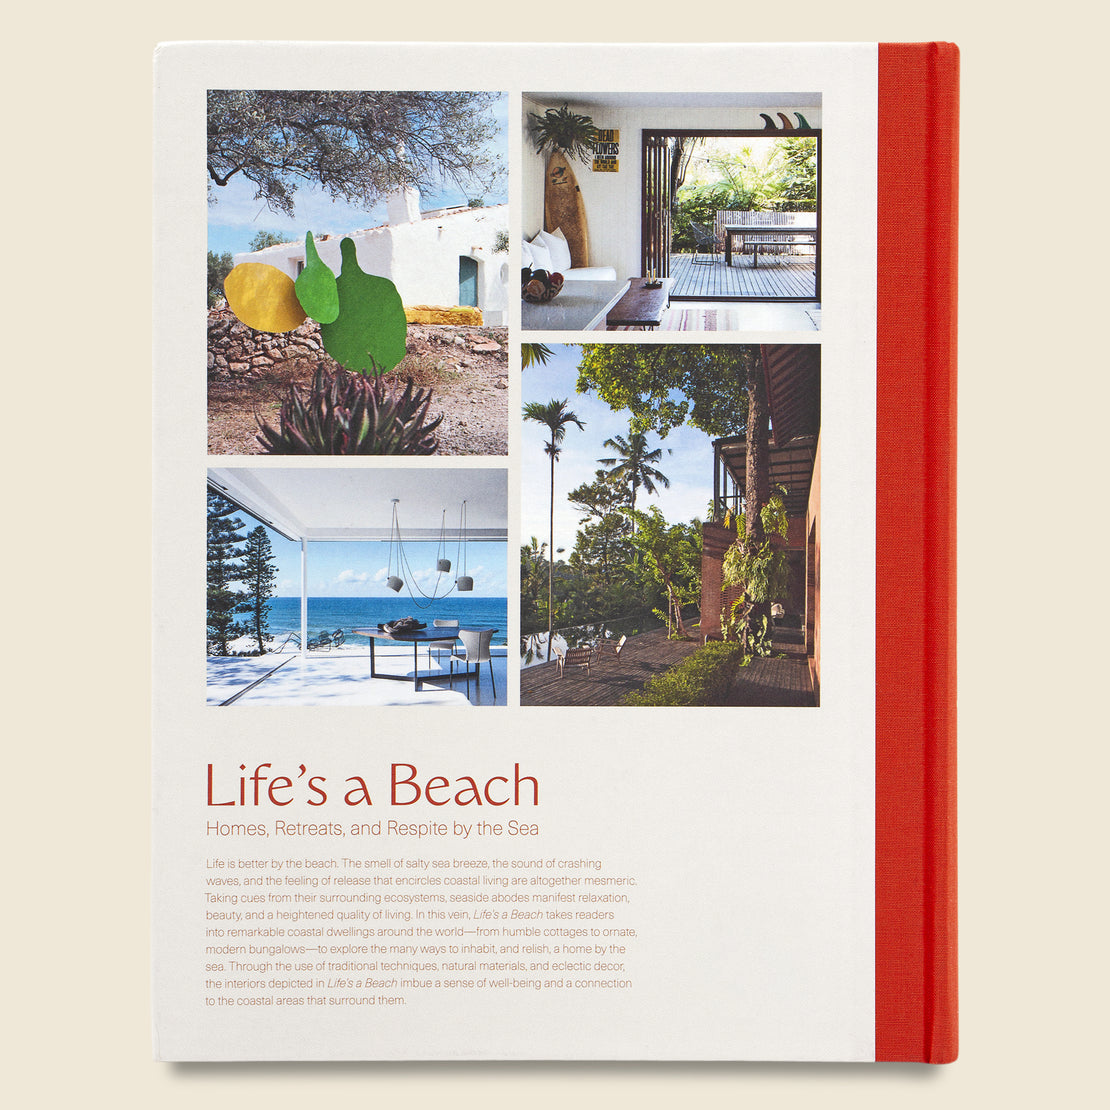 Life's a Beach: Homes, Retreats, and Respite by the Sea - Bookstore - STAG Provisions - Home - Library - Book